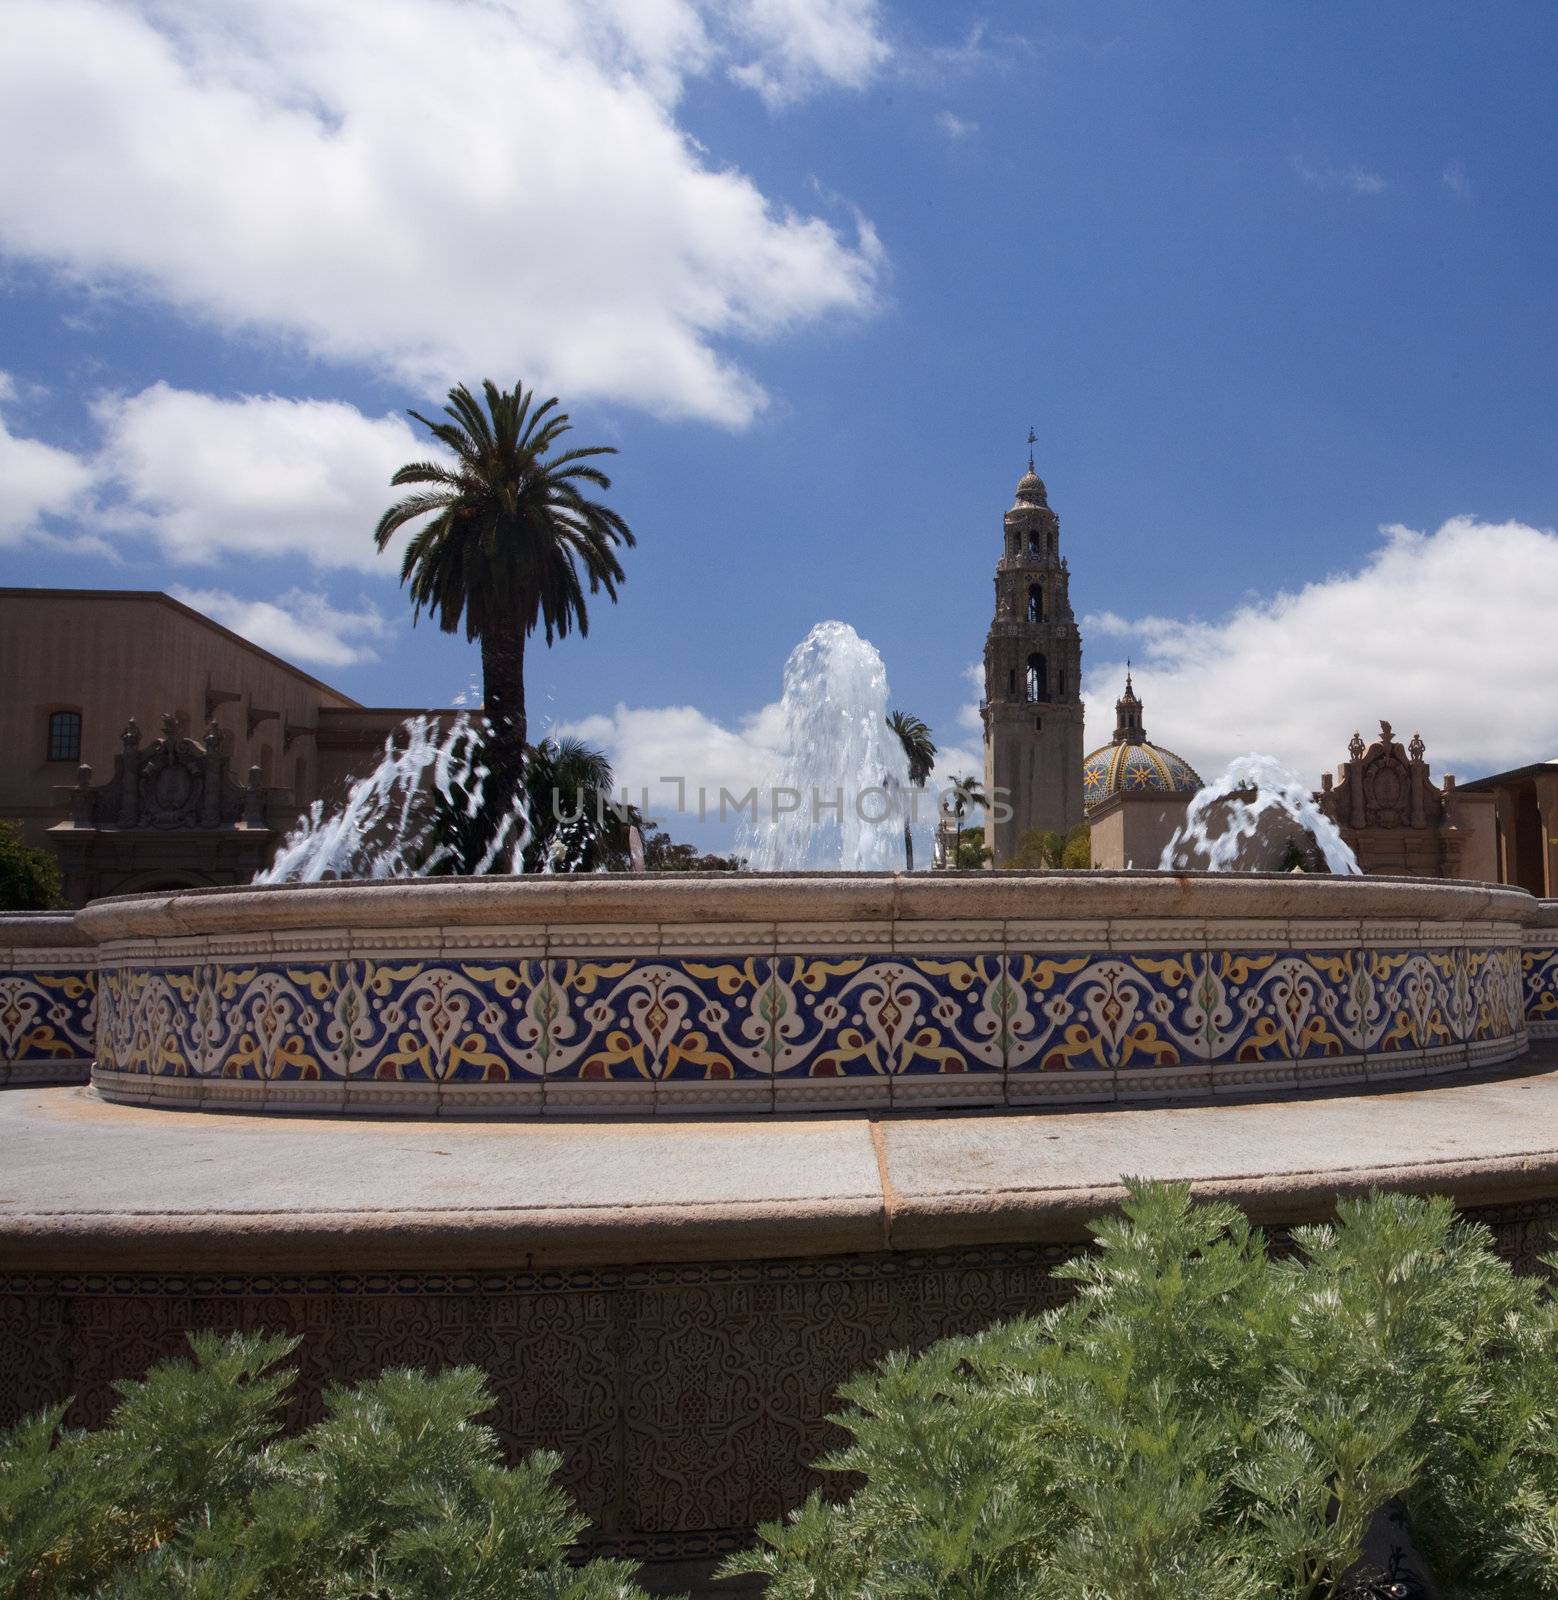 View of the ornate California Tower from Balboa Park in San Diego over fountain